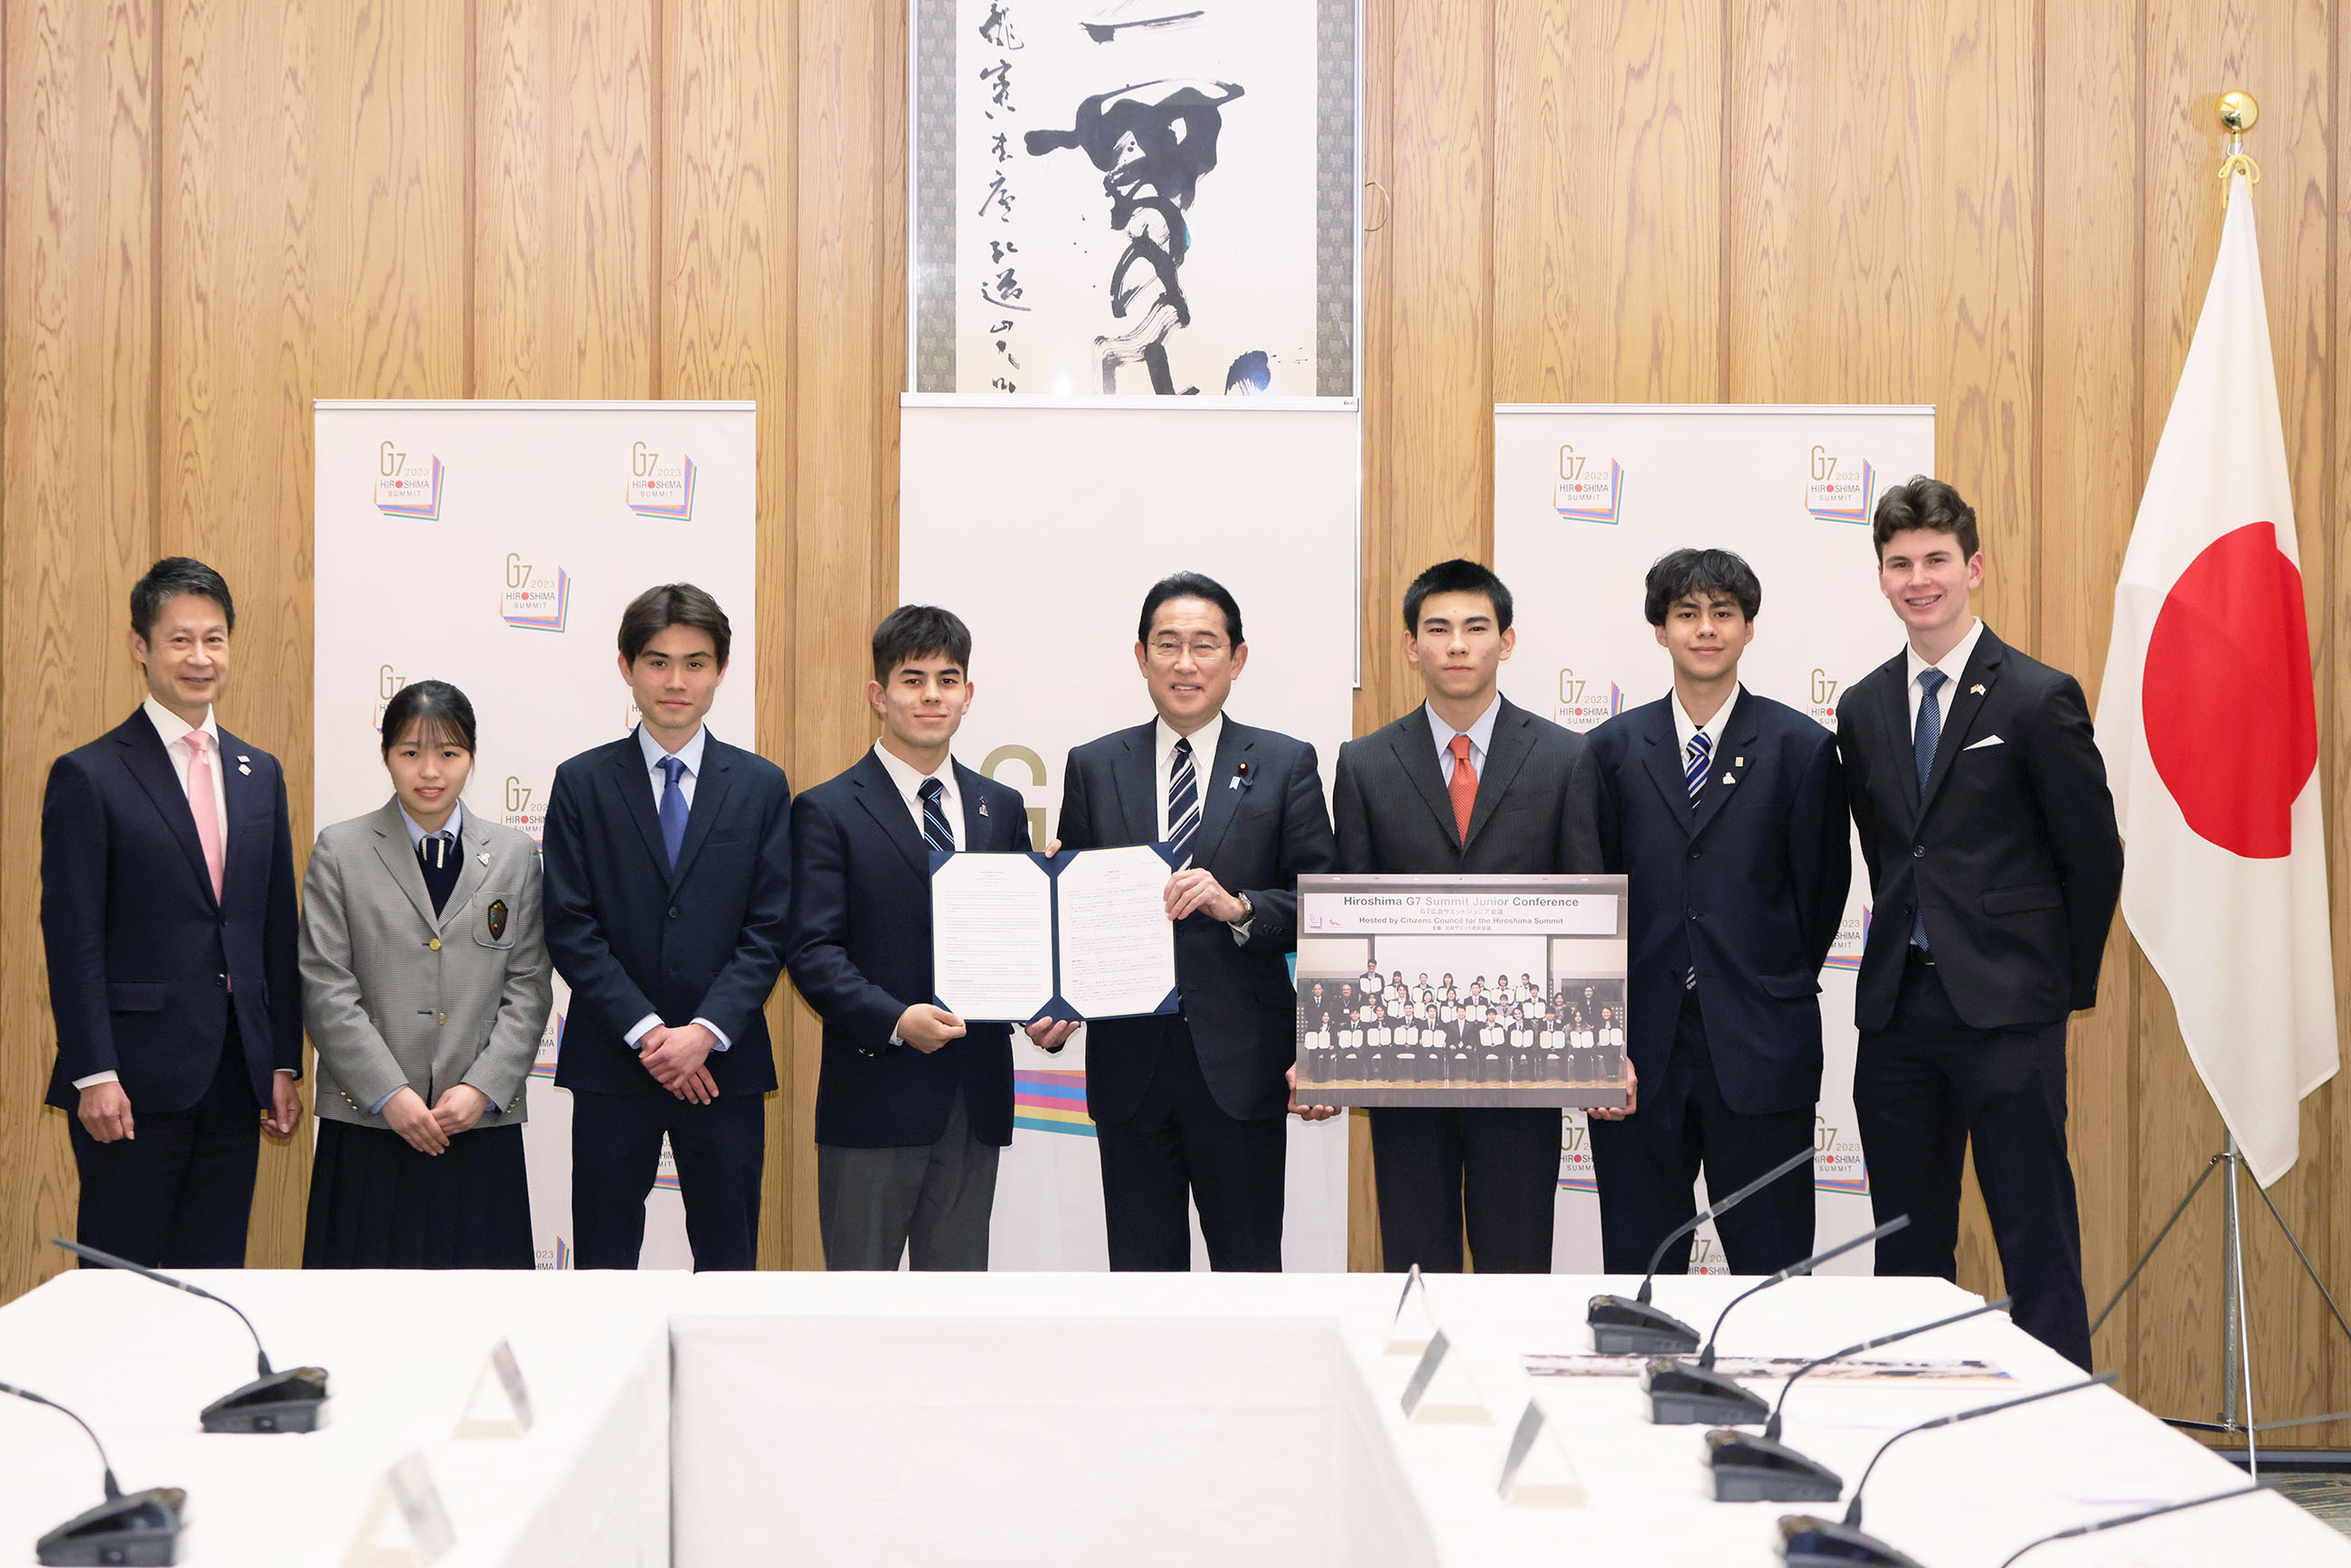 Courtesy Call from the Representatives of the Hiroshima G7 Summit Junior Conference and the Governor of Hiroshima Prefecture